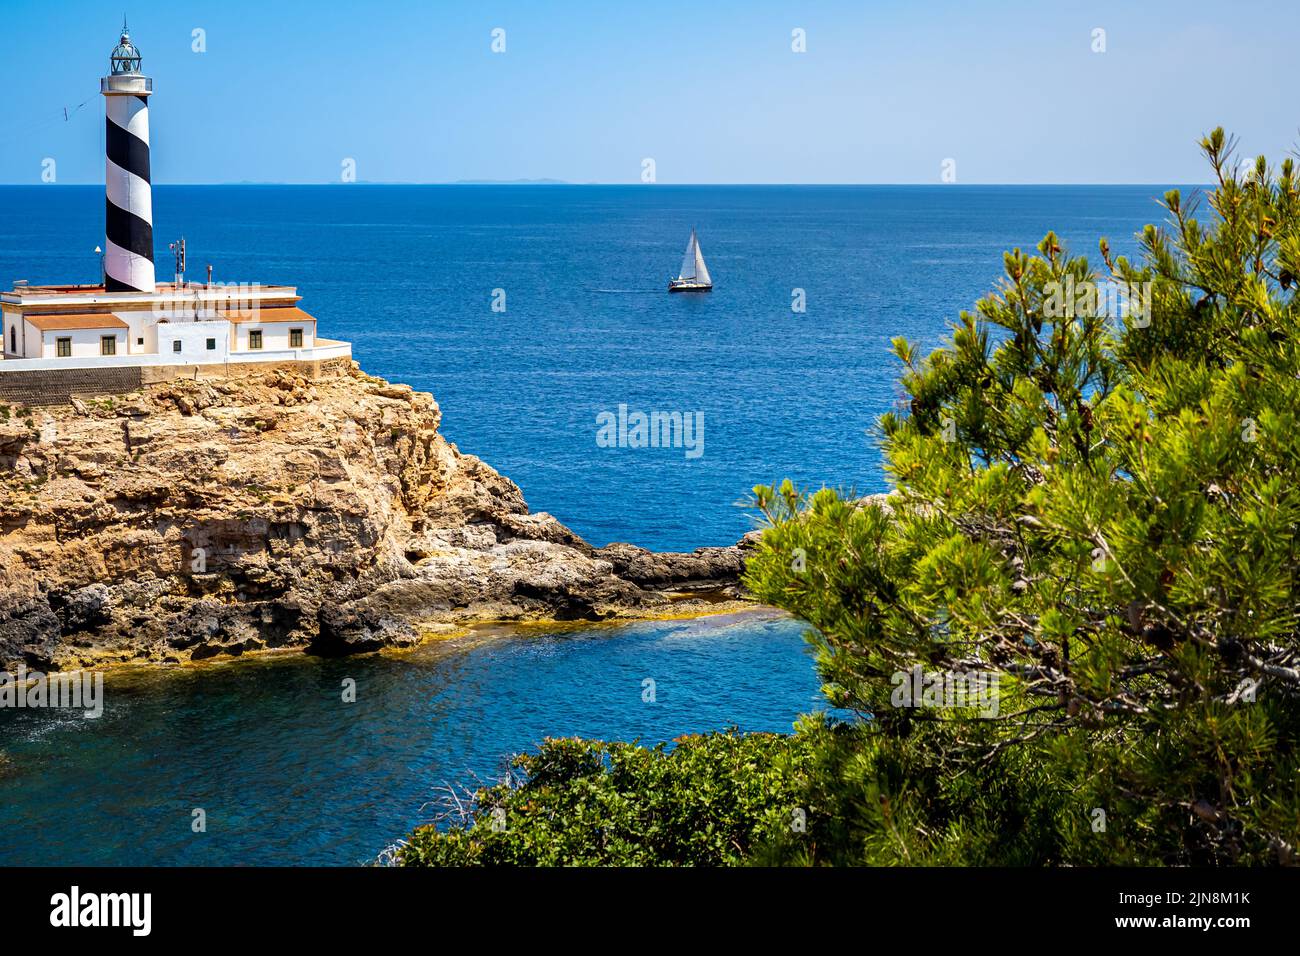 Idyllic Mallorca bay Es Mular with the lighthouse Faro de Cala Figuera in front of a sailboat on the mediterranean sea and islands of Cabrera. Stock Photo